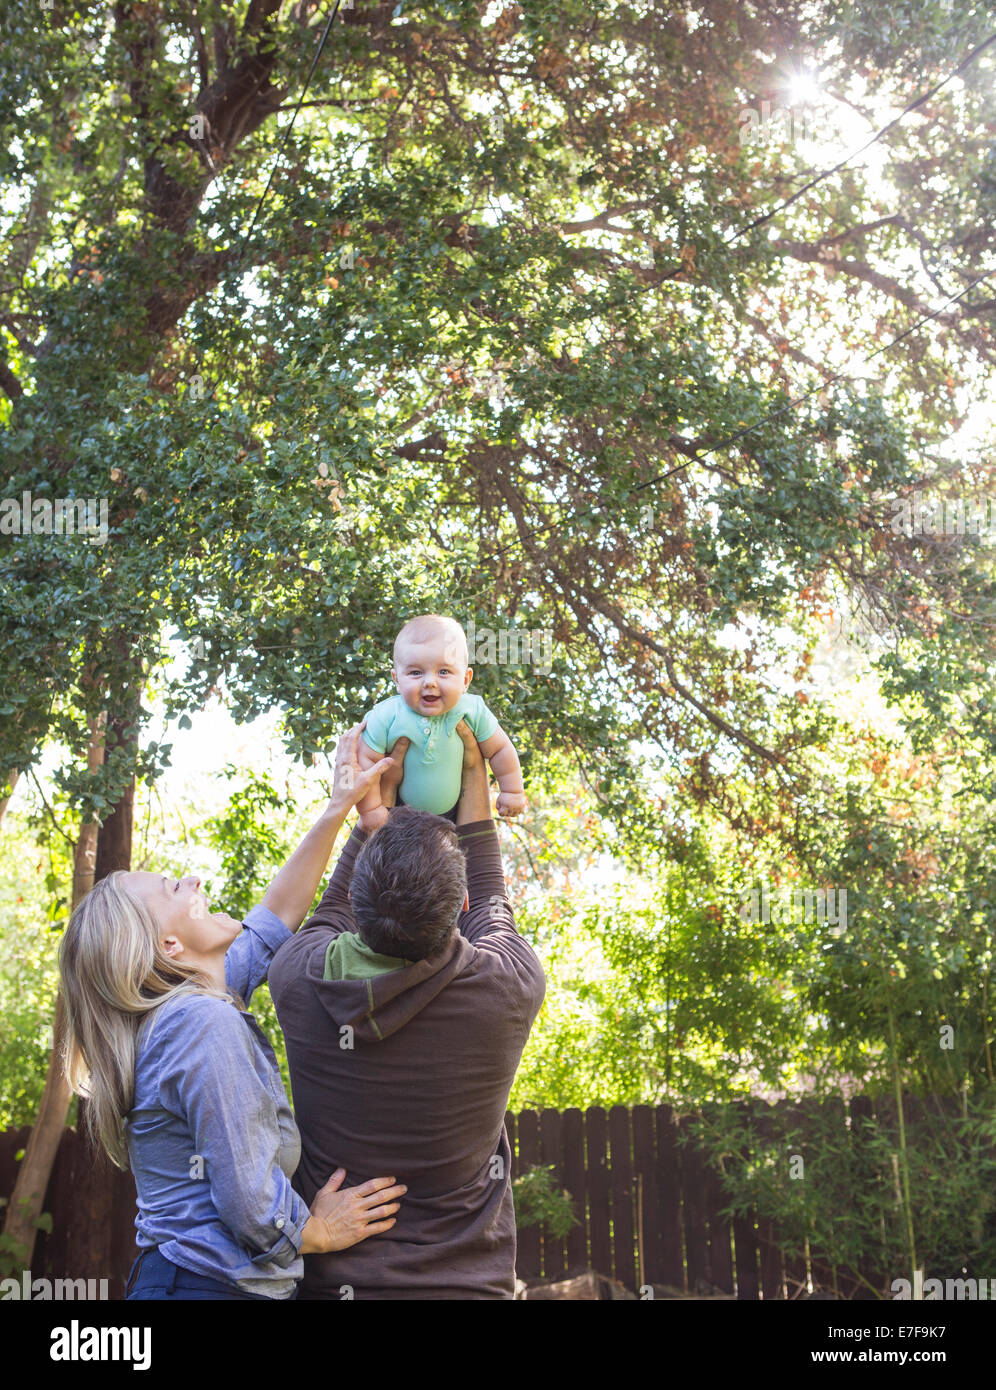 Caucasian couple playing with baby in backyard Stock Photo